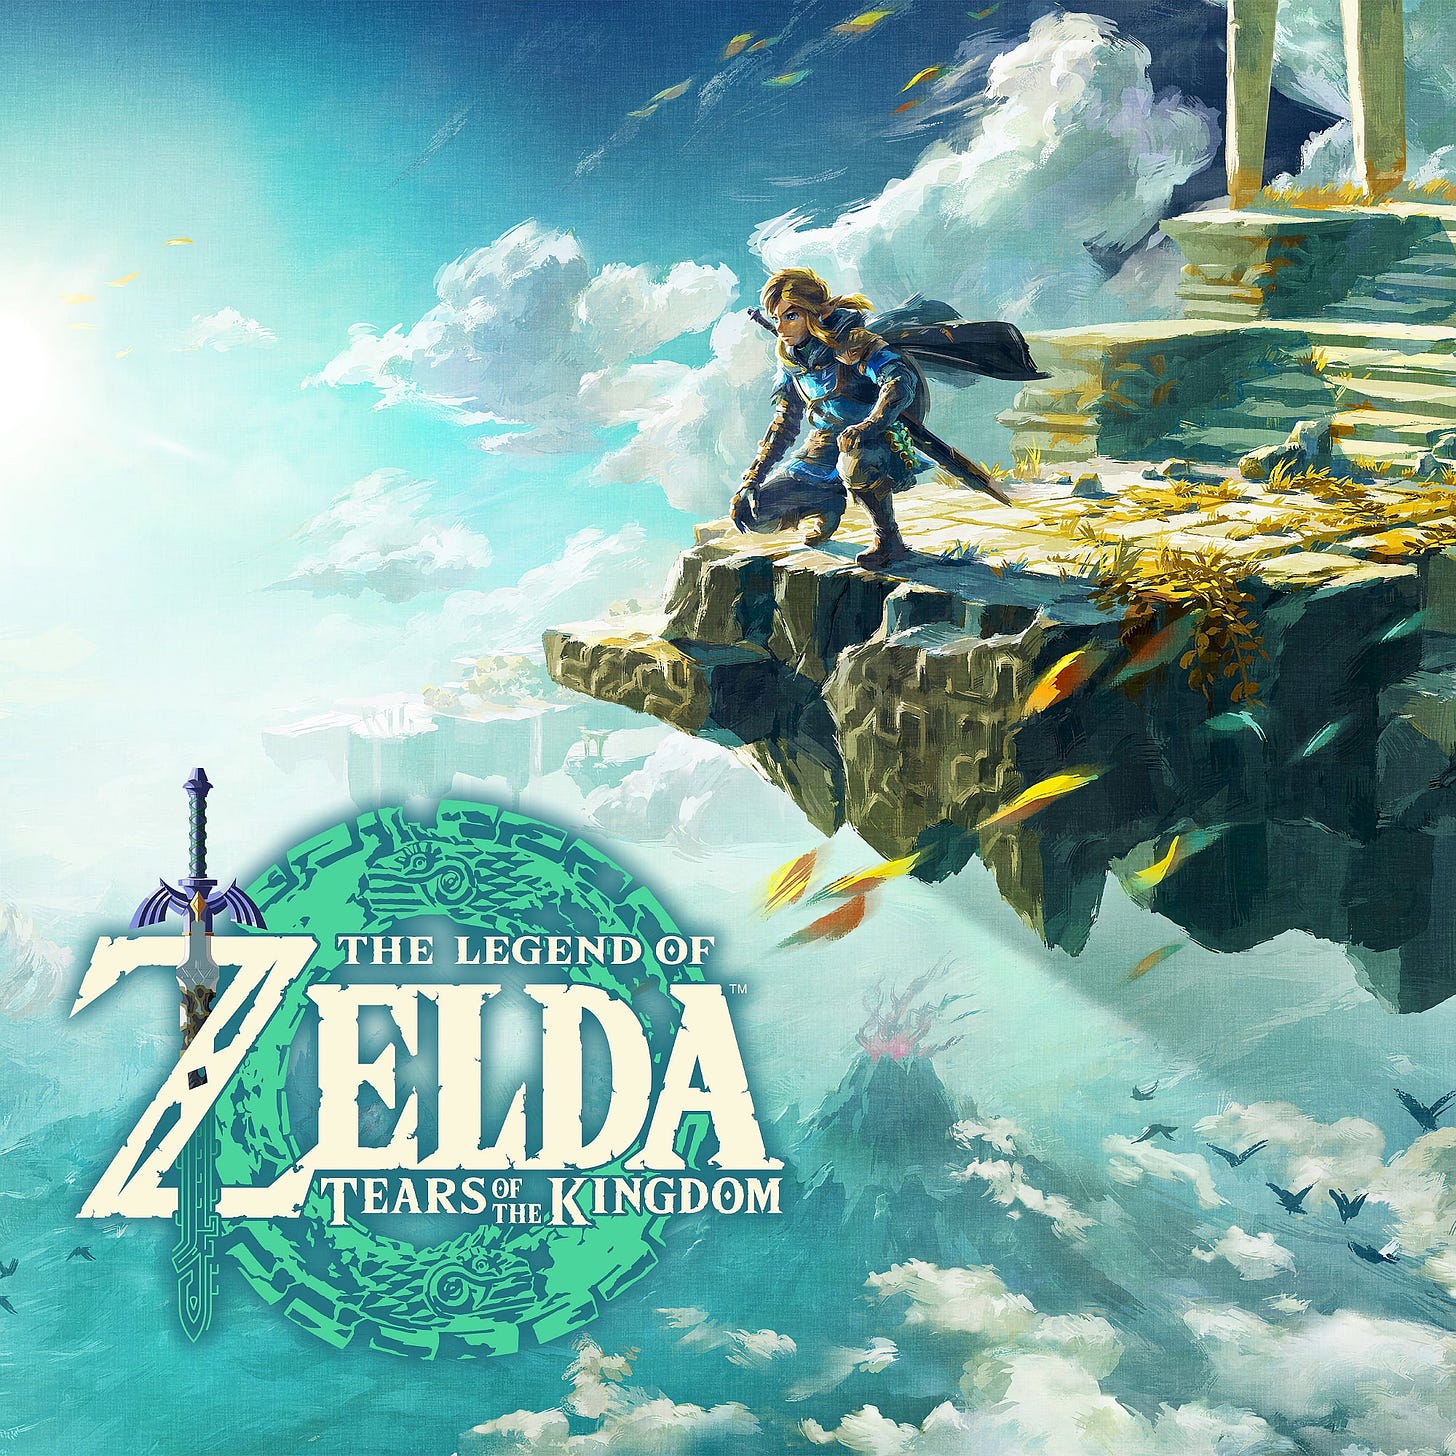 Zelda: Tears of the Kingdom cover image. Link is crouched on an island floating in the sky above the game logo.